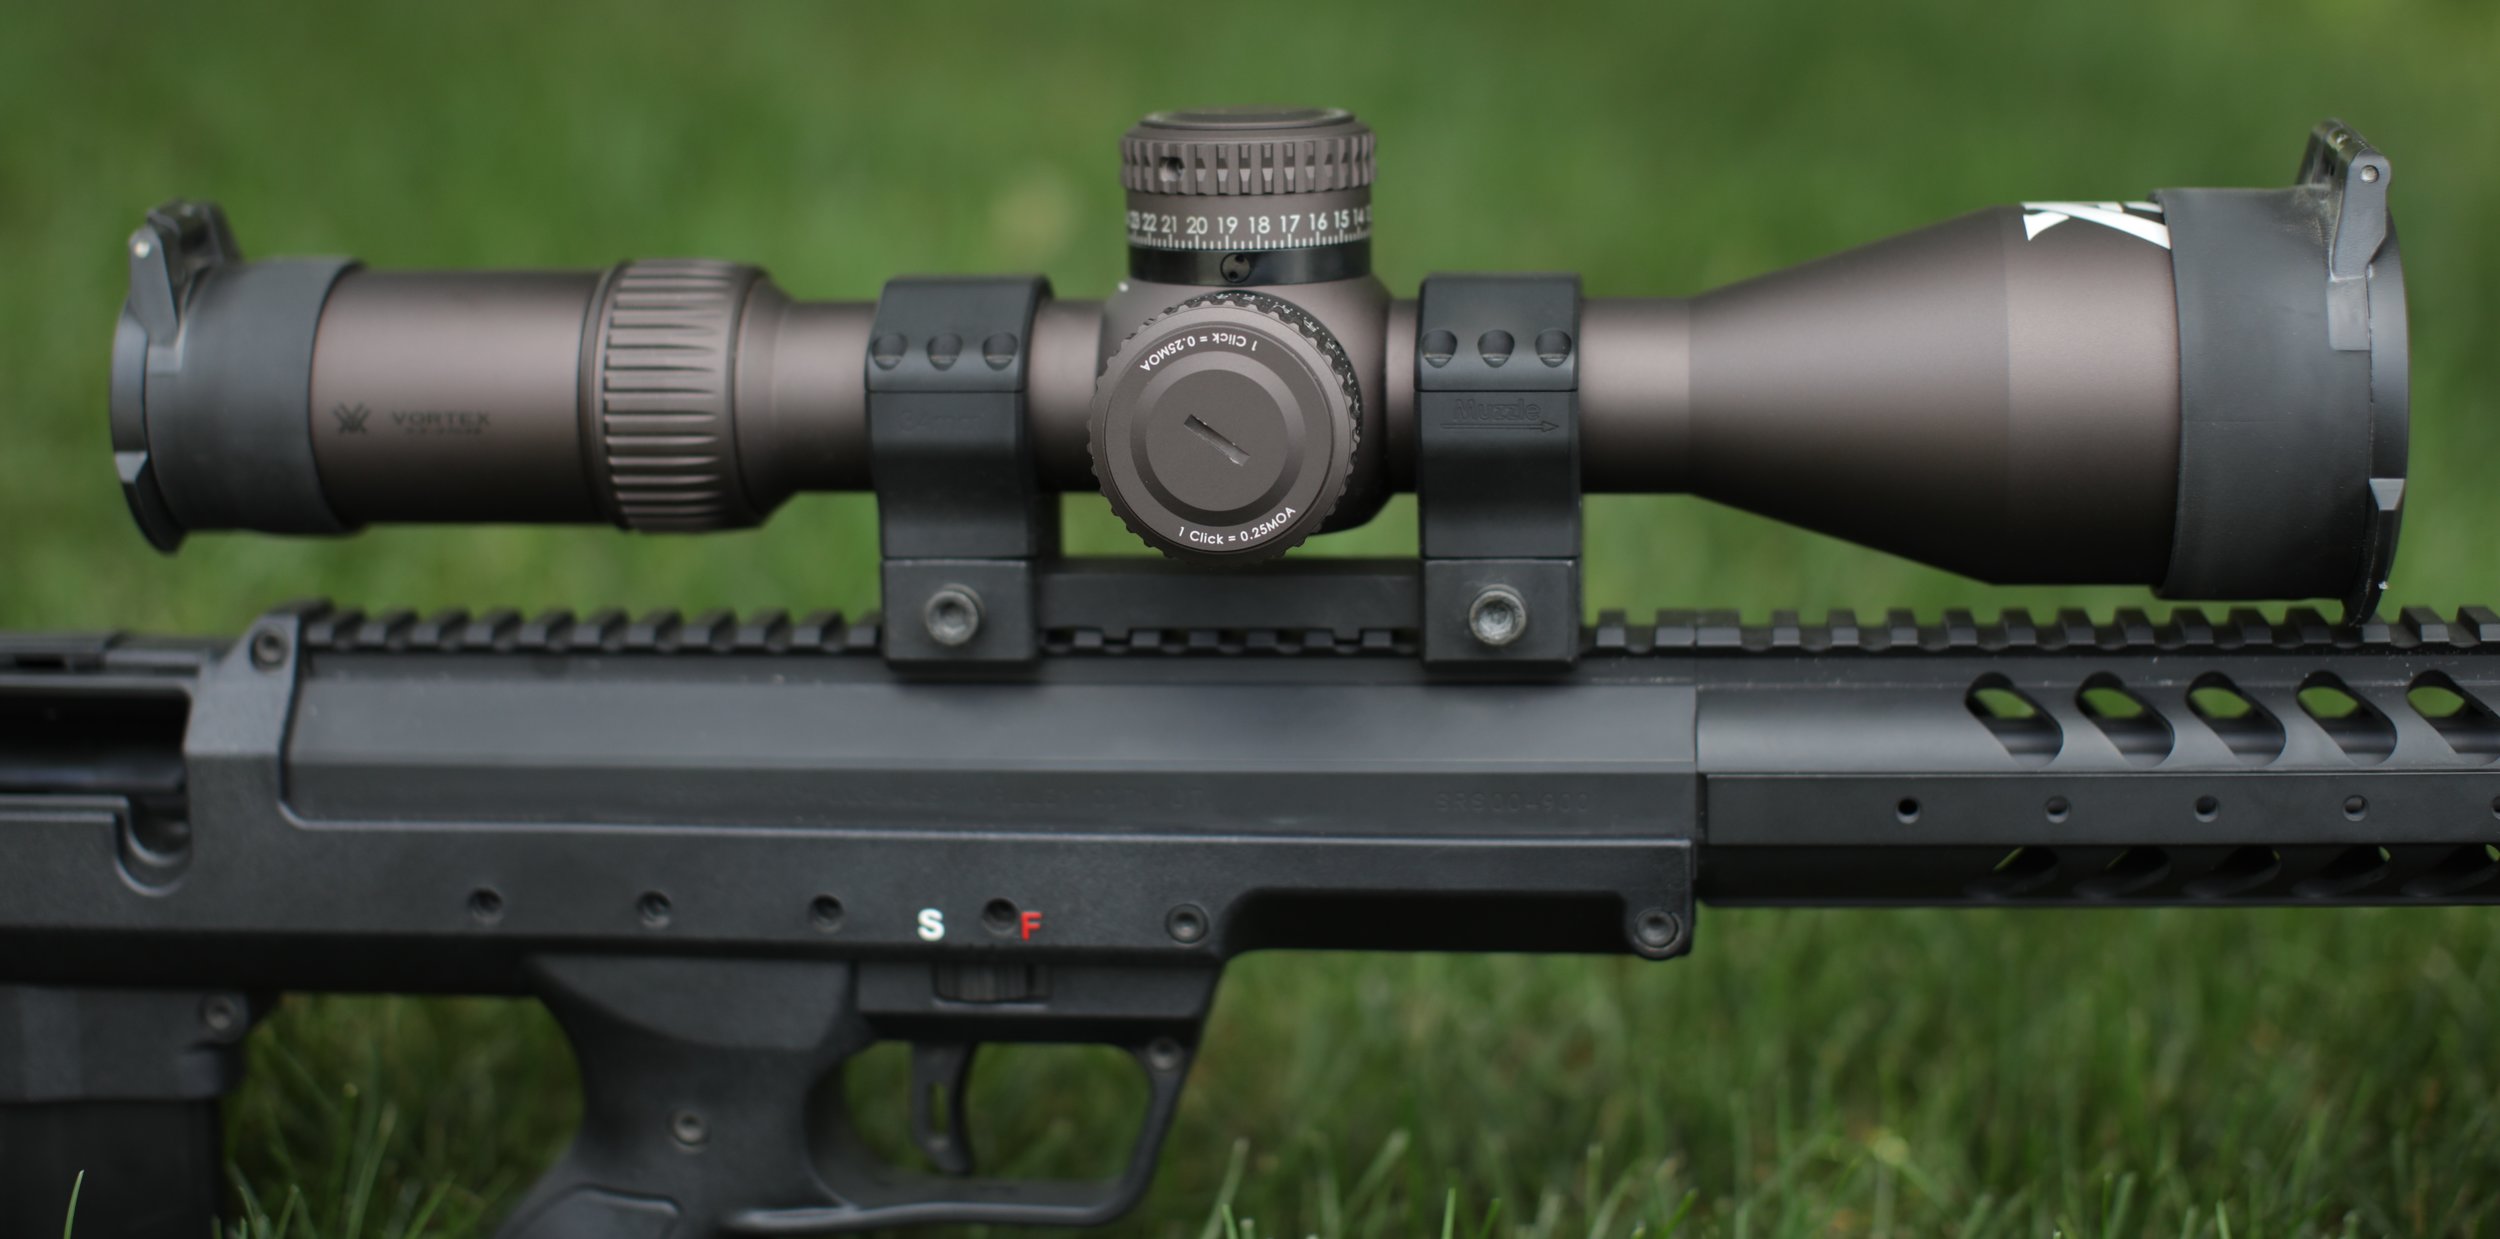 The Desert Tech Scope mount offers a 20 MOA (or 30 or 40) pitch and includes a bubble level in the rear ring. The Vortex Razor HD Gen 2 scope is flawless in clarity and function.